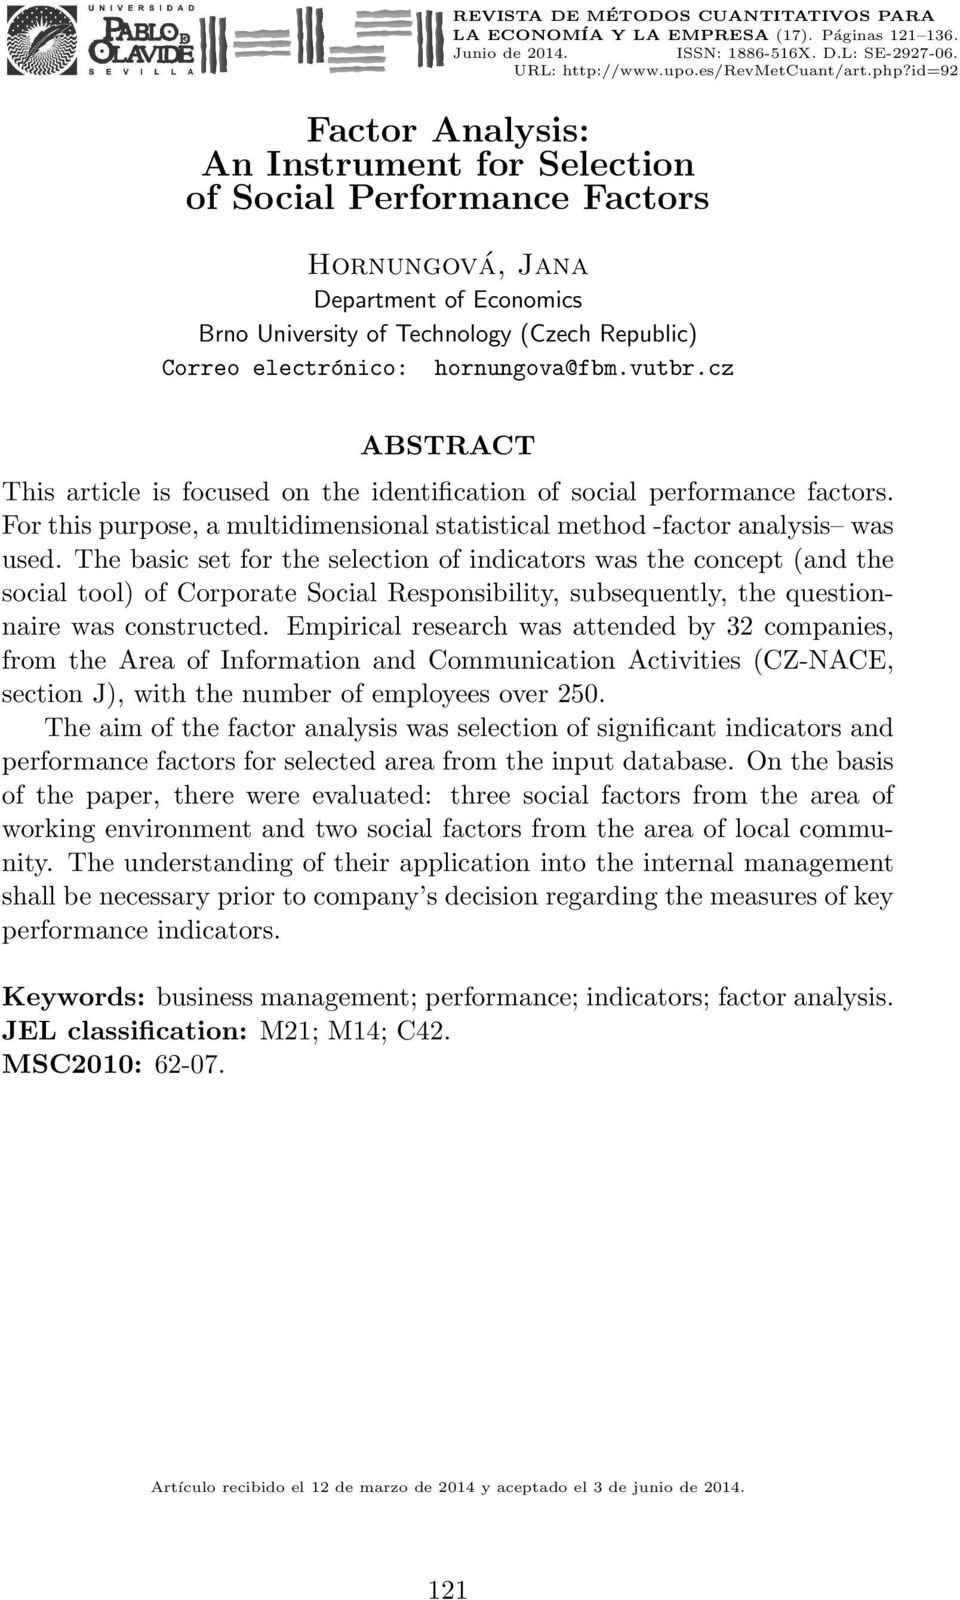 hornungova@fbm.vutbr.cz ABSTRACT This article is focused on the identification of social performance factors. For this purpose, a multidimensional statistical method -factor analysis was used.